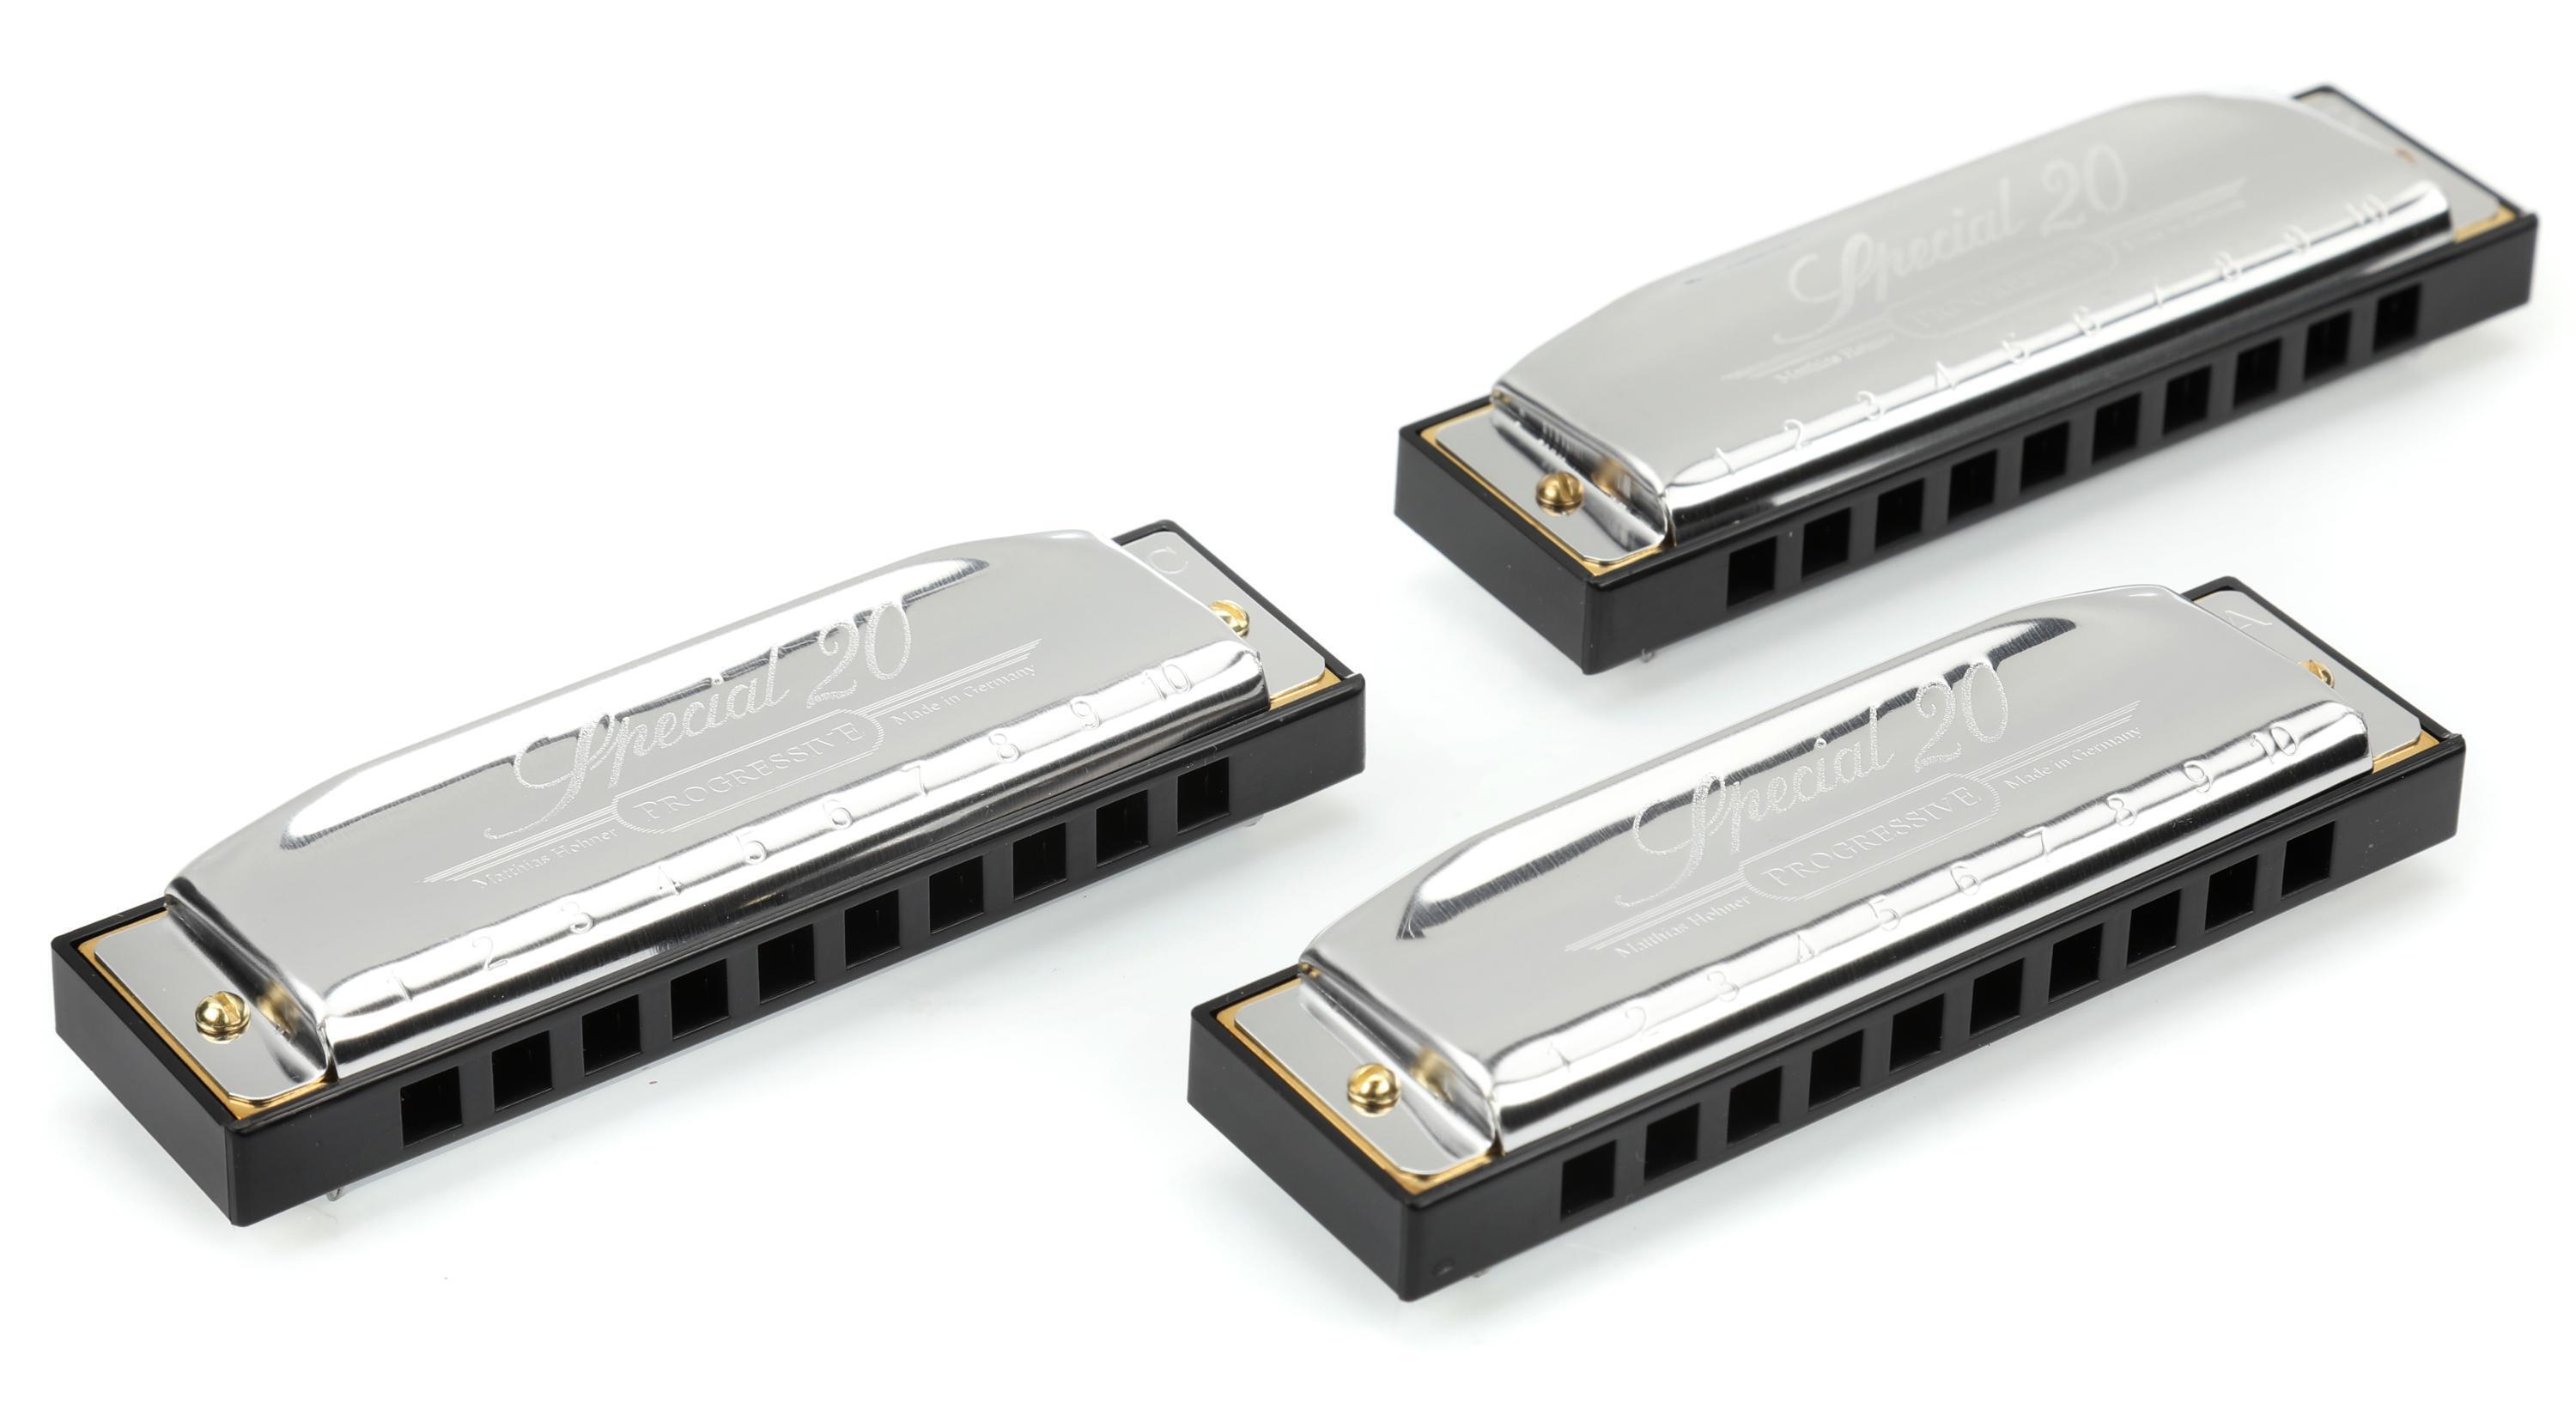 Buy Hohner Harmonica Special 20 Pro Pack - 3P560